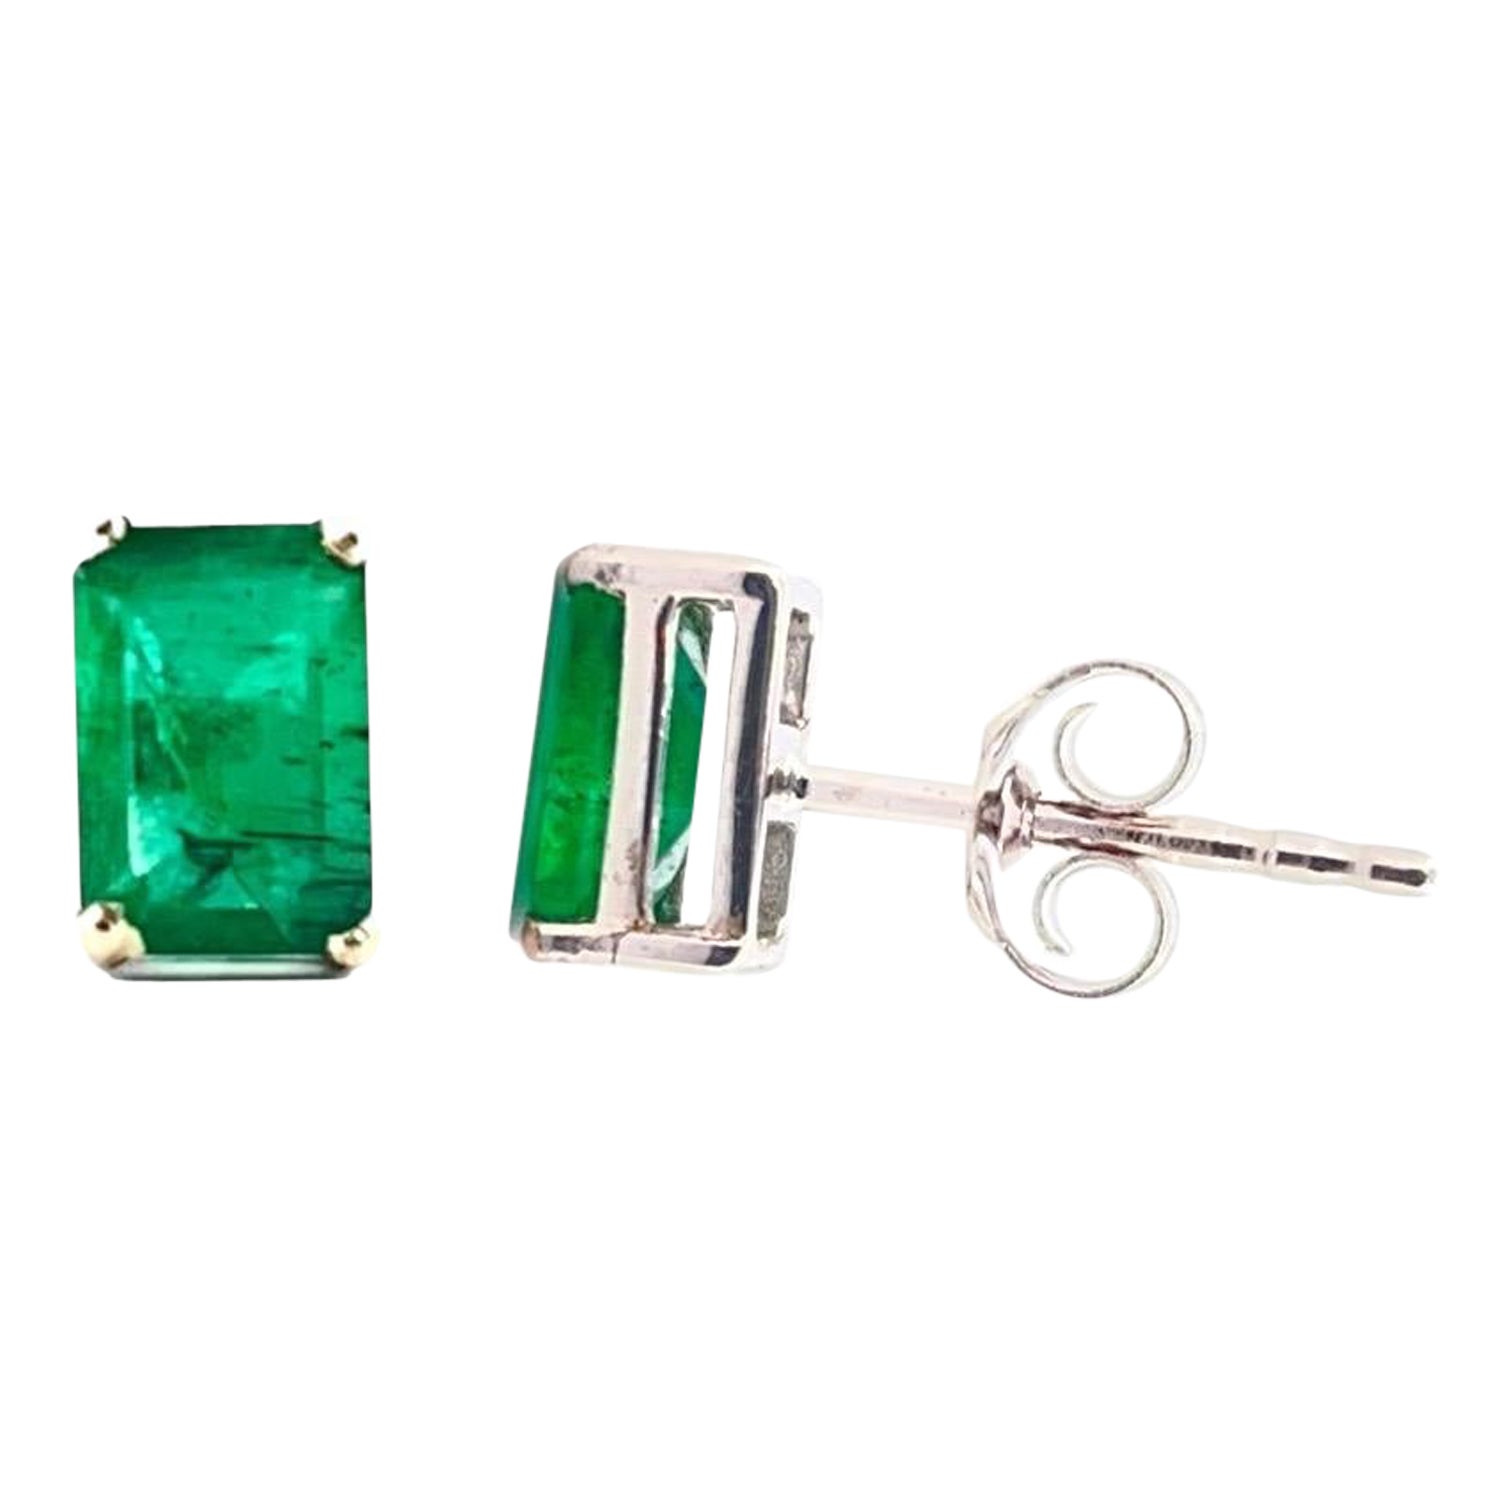 1 to 1.05 Ct Emerald Gemstone Stud Earrings - 14K White Gold For Sale